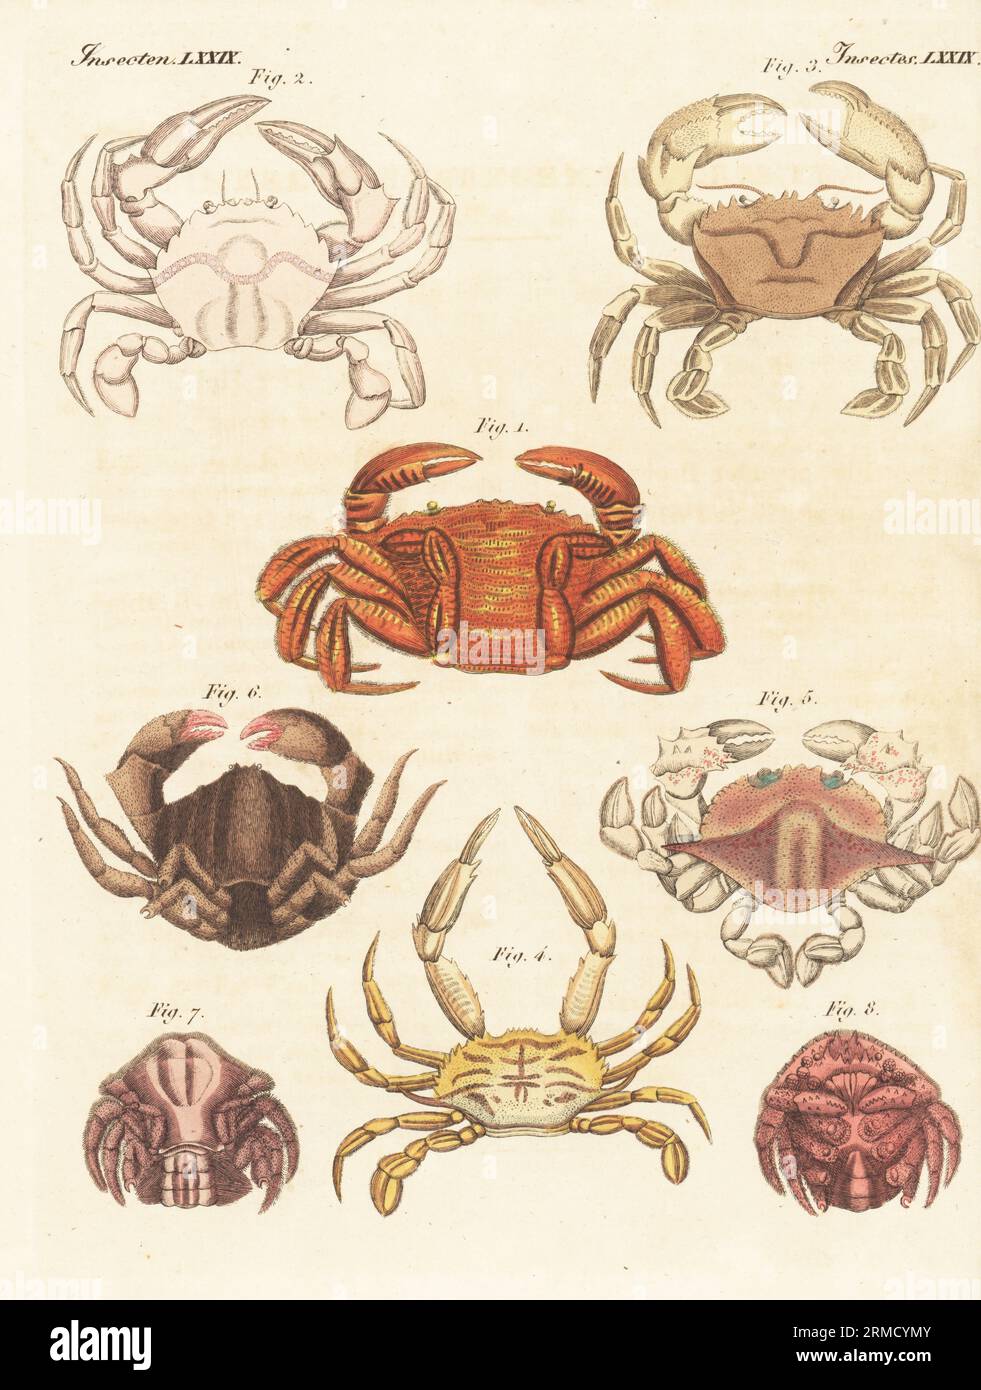 Velvet crab, Necora puber 1,3, harbour crab, Liocarcinus depurator 2, Amphithrax aculeatus 4, moon crab, Matuta victor 5, stone crab, Menippe rumphii 6, and sponge crab, Dromia personata 7,8. Handcoloured copperplate engraving from Carl Bertuch's Bilderbuch fur Kinder (Picture Book for Children), Weimar, 1815. A 12-volume encyclopedia for children illustrated with almost 1,200 engraved plates on natural history, science, costume, mythology, etc., published from 1790-1830. Stock Photo